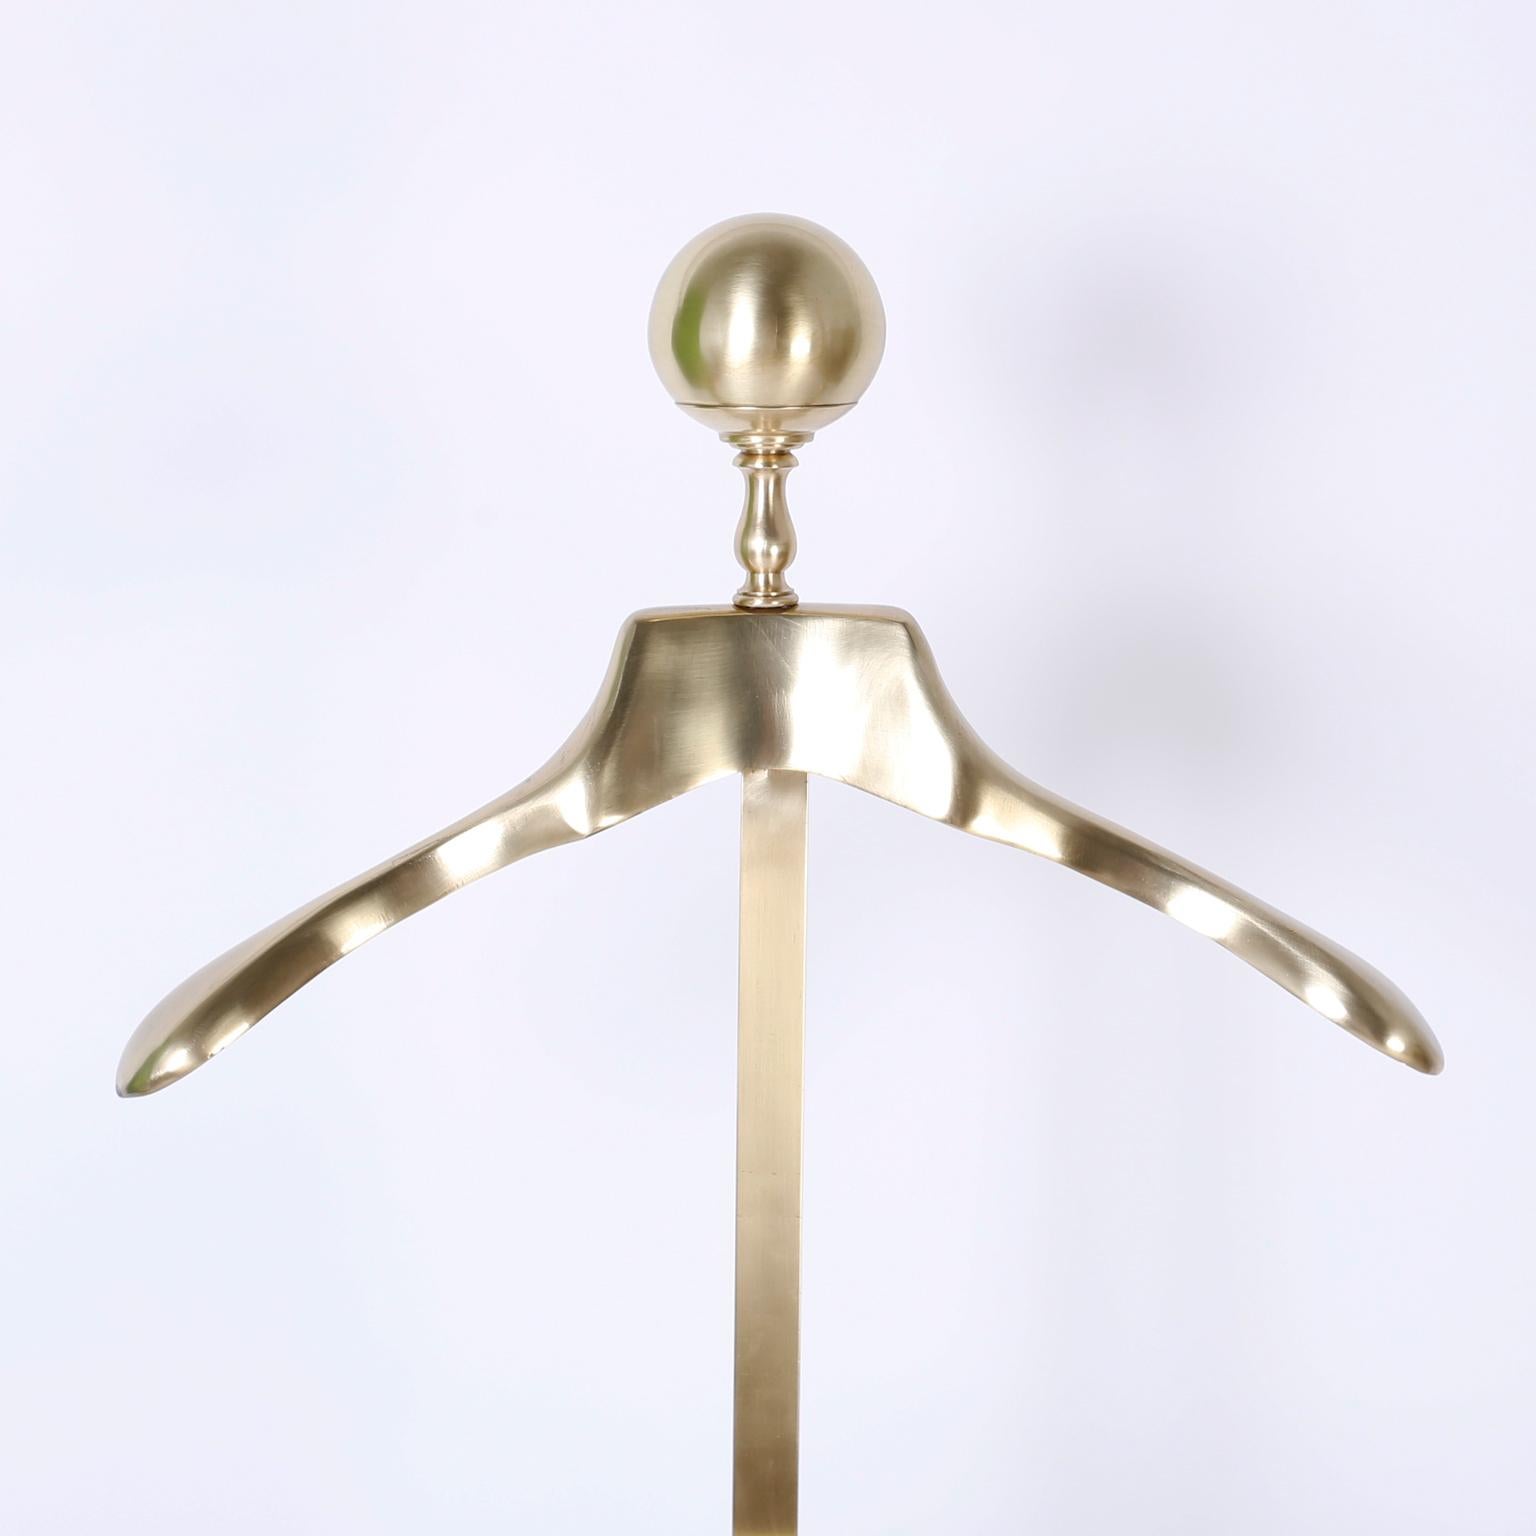 Victorian gentlemen's valet or silent butler crafted in brass with a Classic finial top, coat hanger, adjustable change and jewelry tray, trouser rack, and a three legged base. Hand polished and lacquered for easy care.